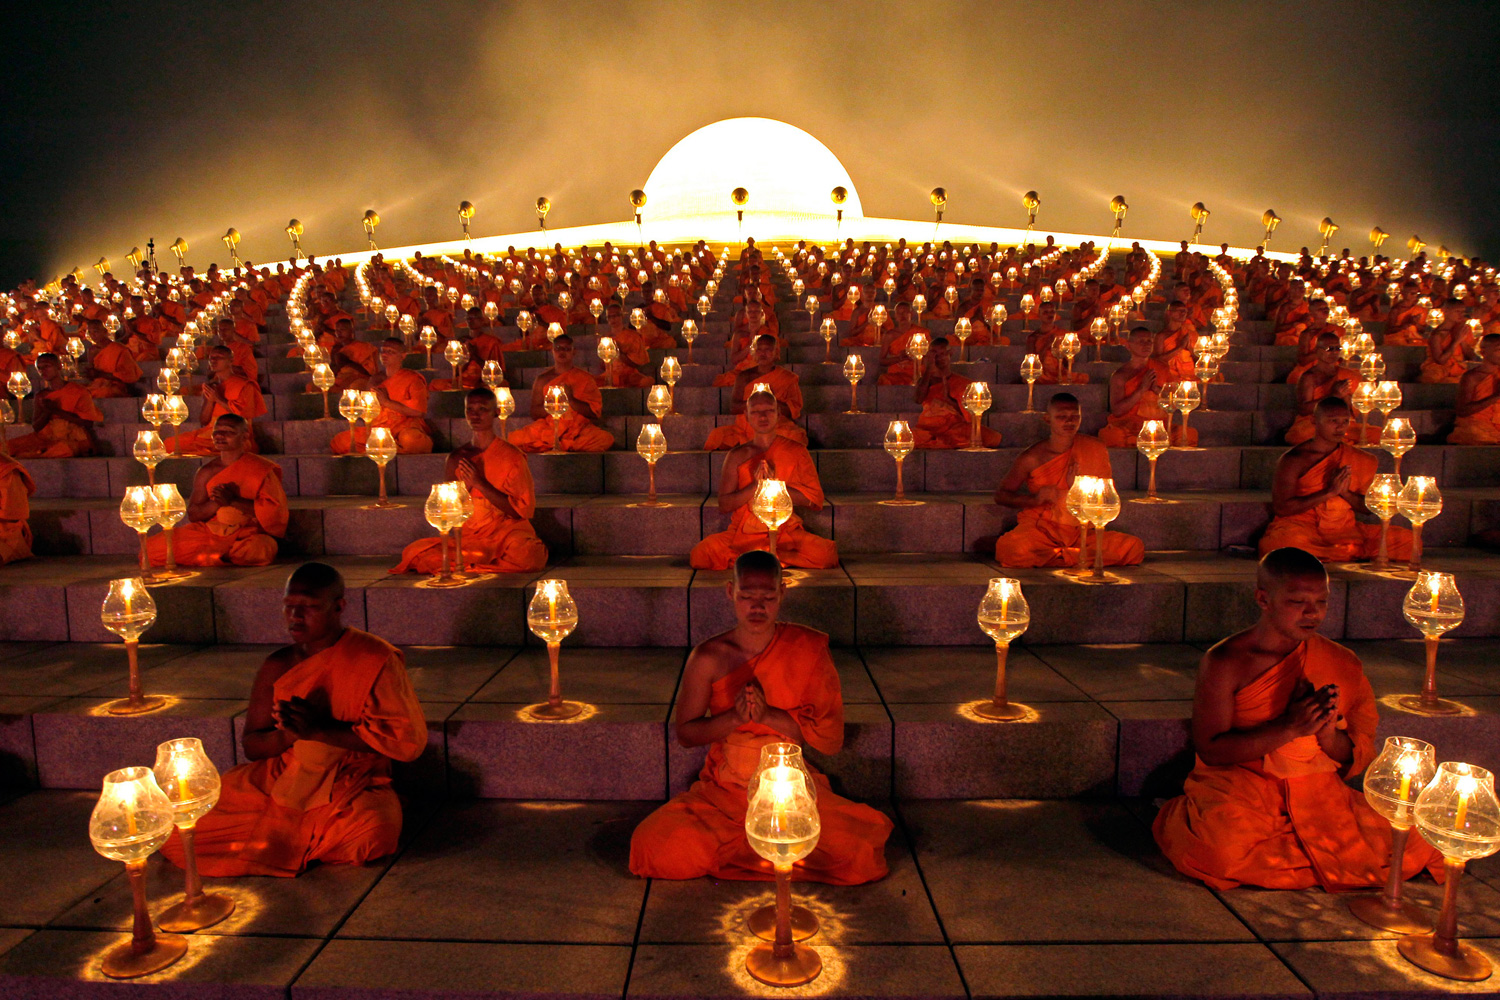 March 7, 2012. Thousands of Thai Buddhist monks chant during lantern lighting to celebrate Makha Bucha day at Dhammakaya Temple in Pathum Thani province, on the outskirts of Bangkok.